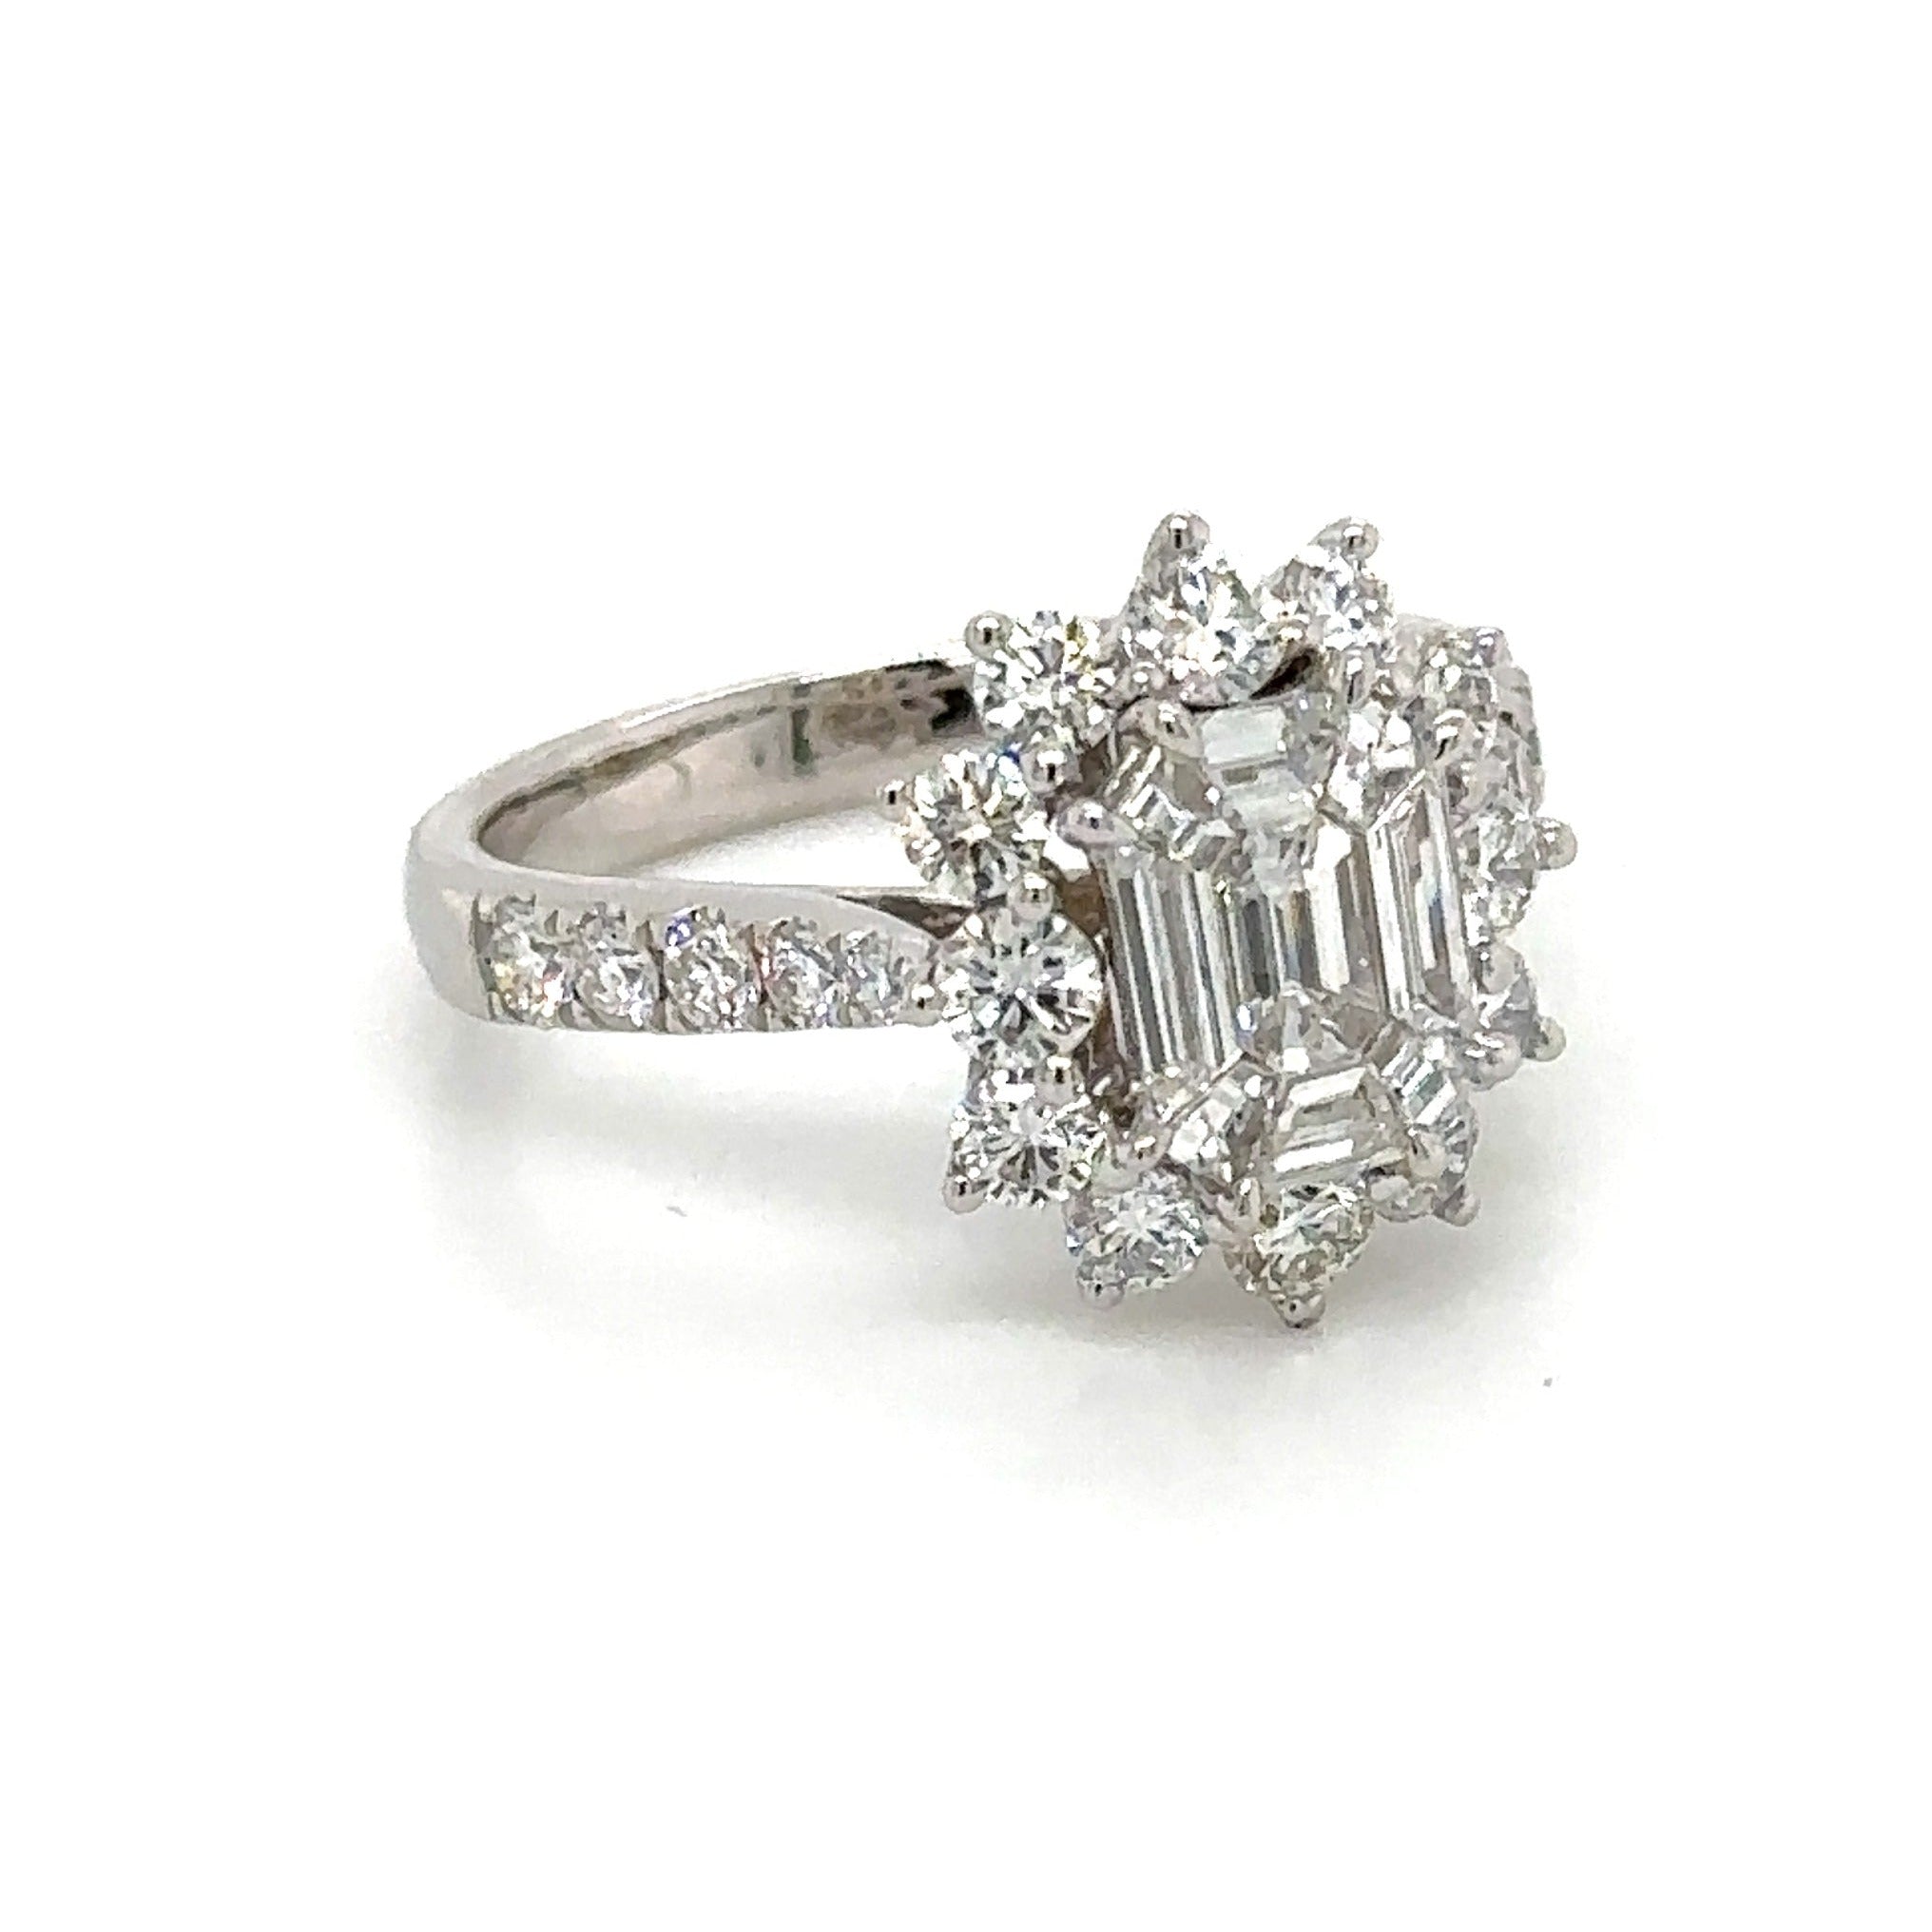 1.82CT T.W. Octagon Invisible Set Art- Deco Style Ring